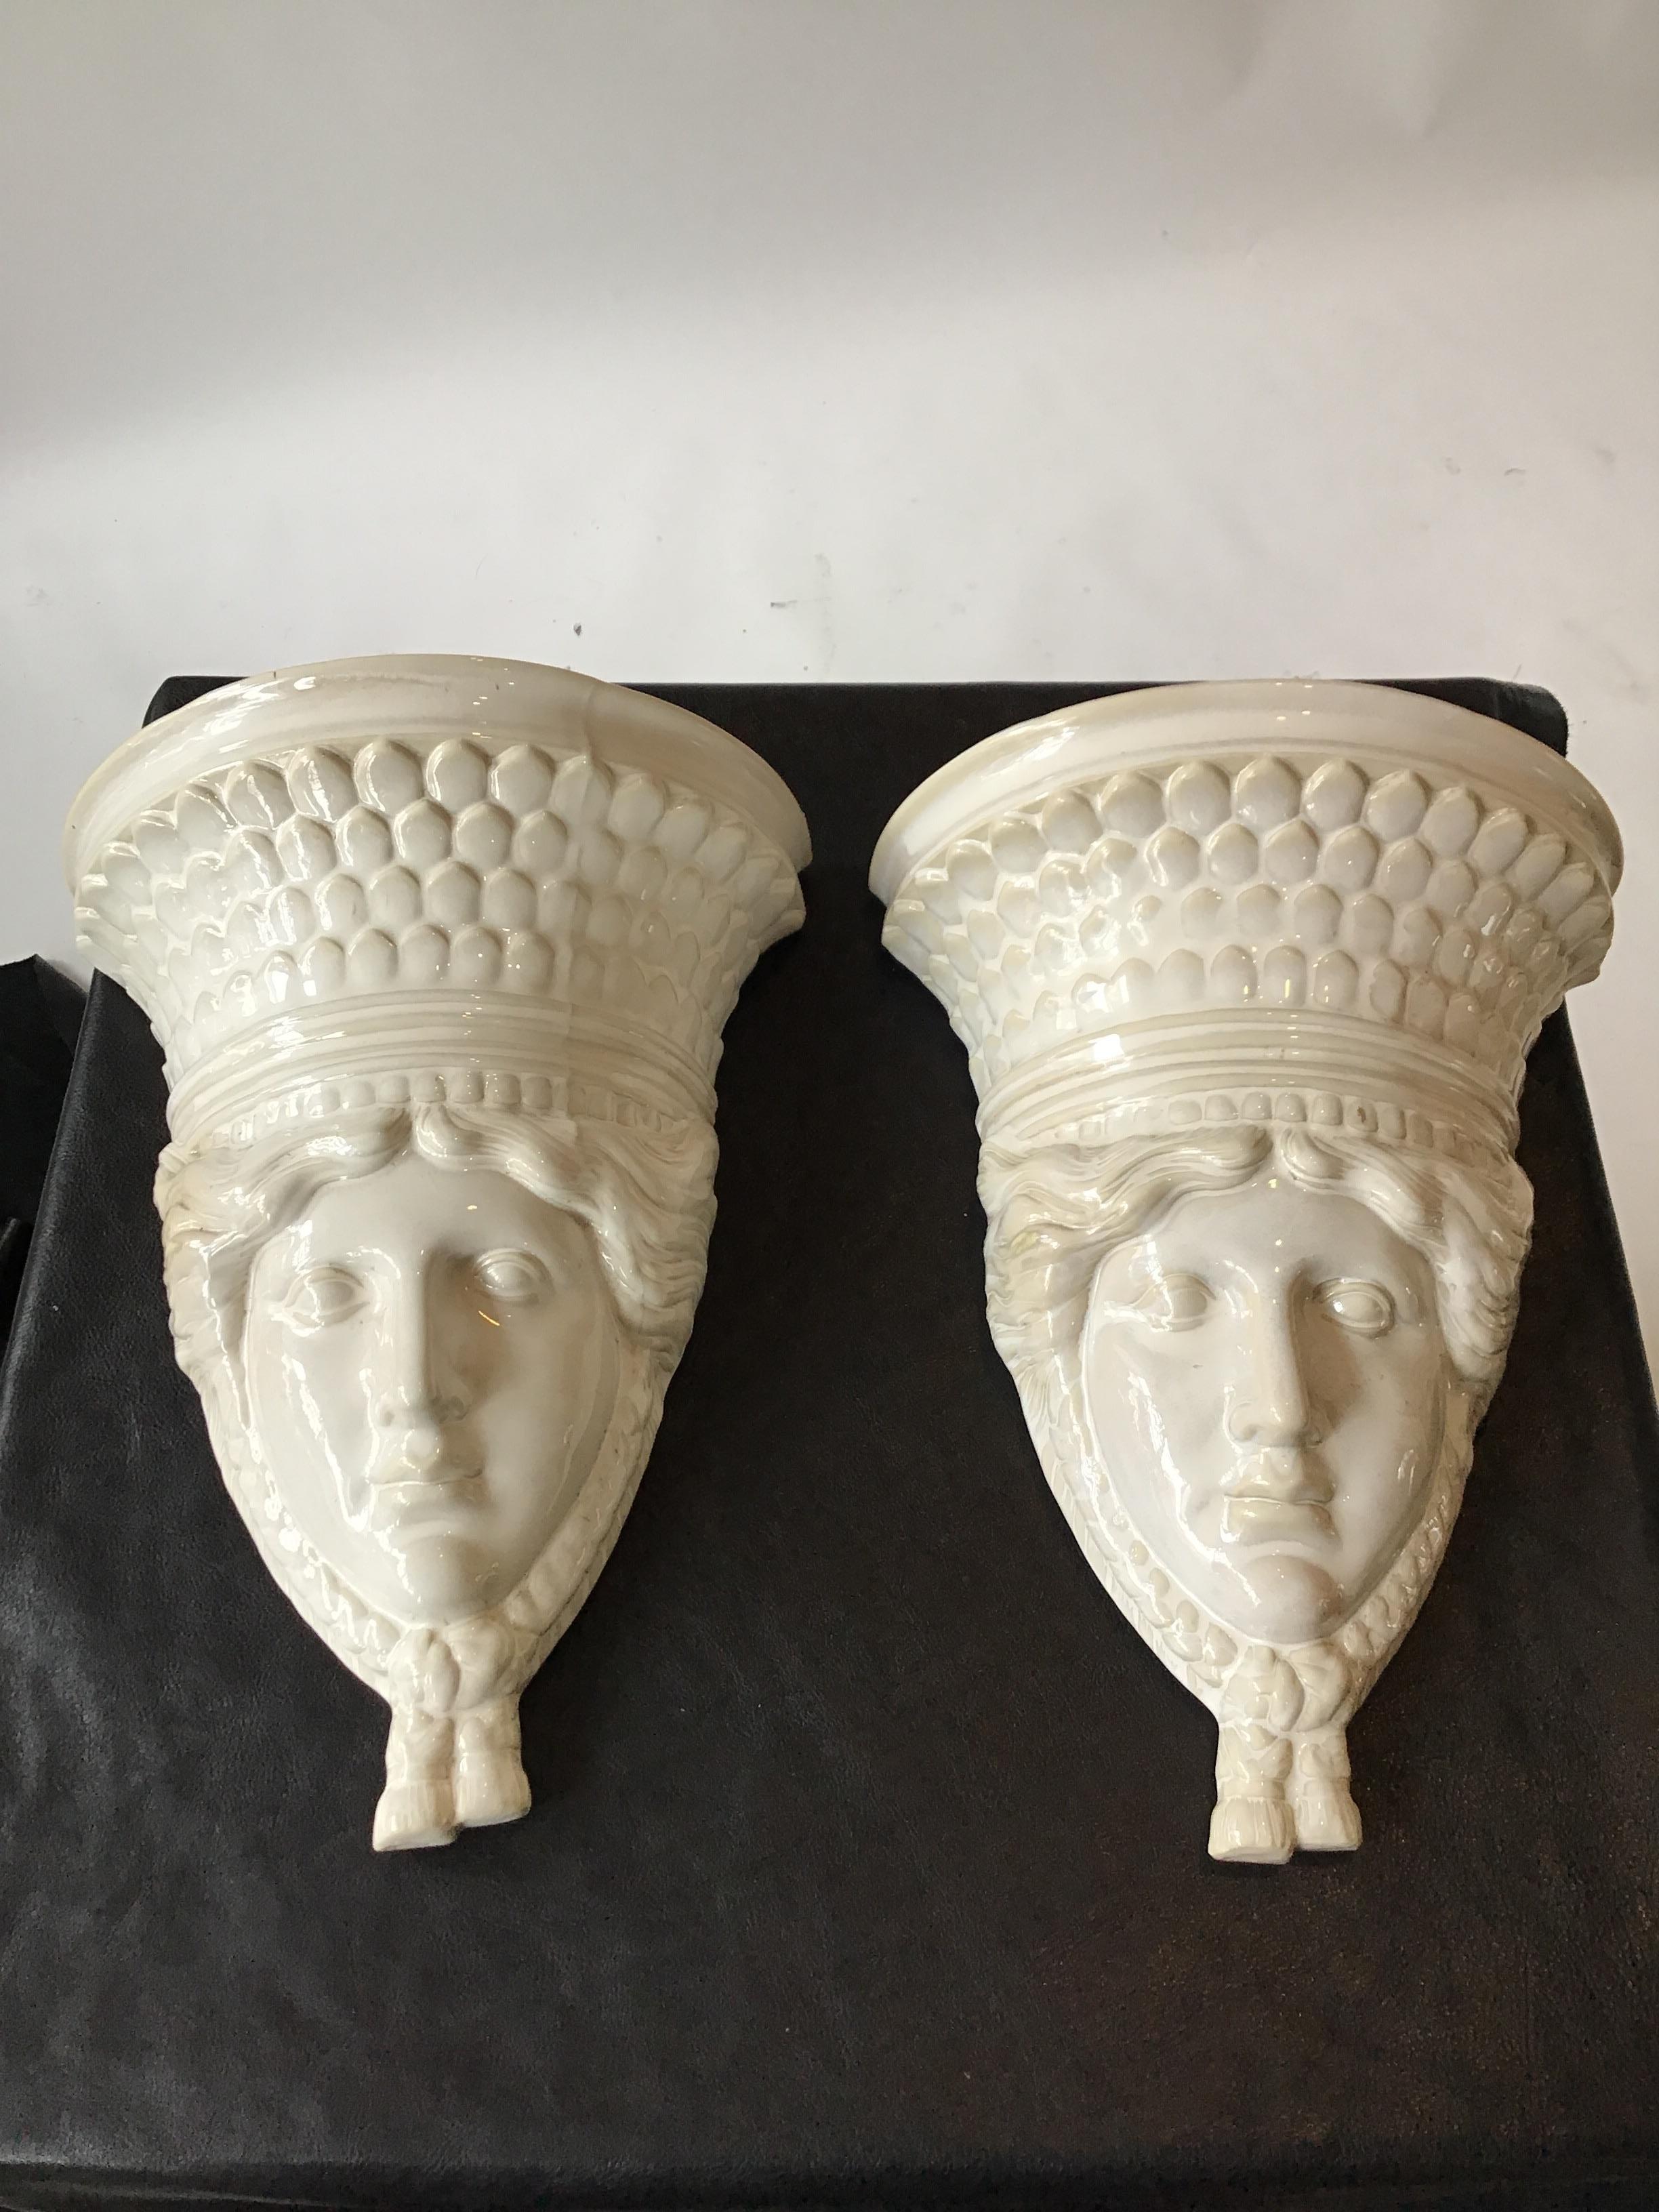 Pair of 1960s ceramic head wall planters by Sarreid. Made in Spain.